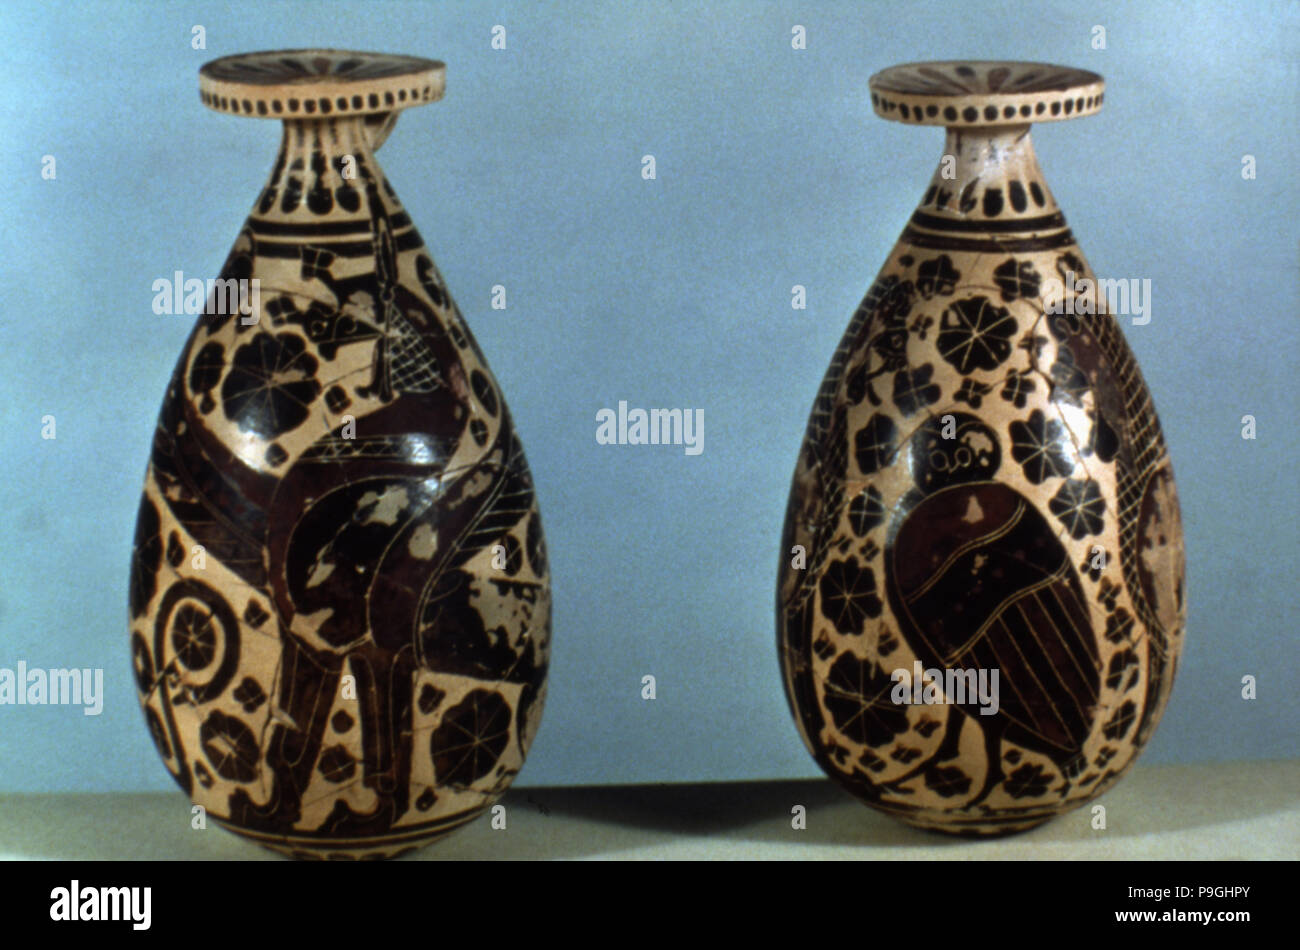 Corinthian vases decorated with black figures of animals, fantastic creatures and floral motifs. Stock Photo